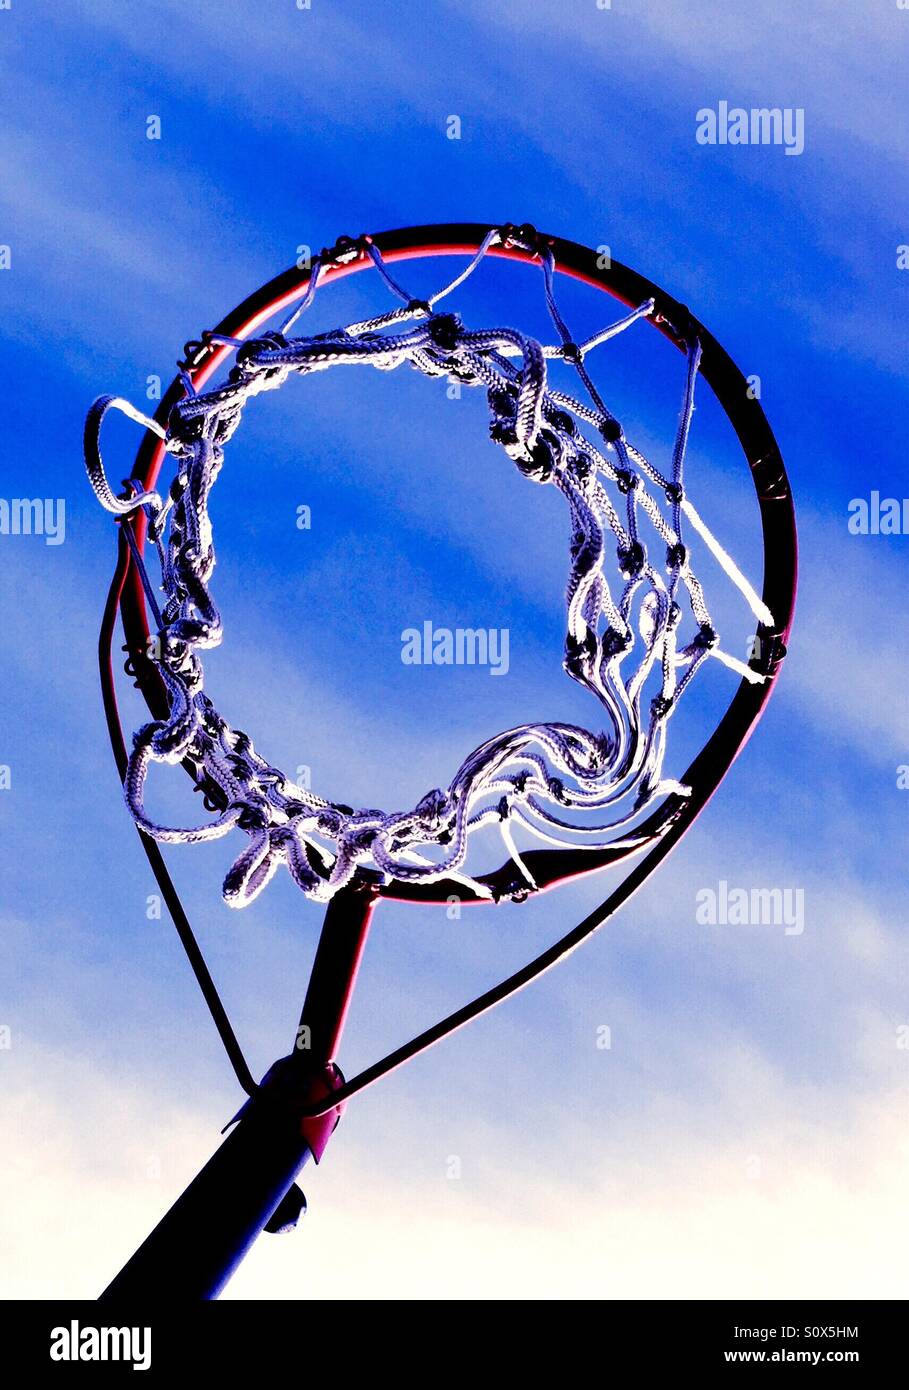 Looking up at a basketball net towards a blue sky. Stock Photo